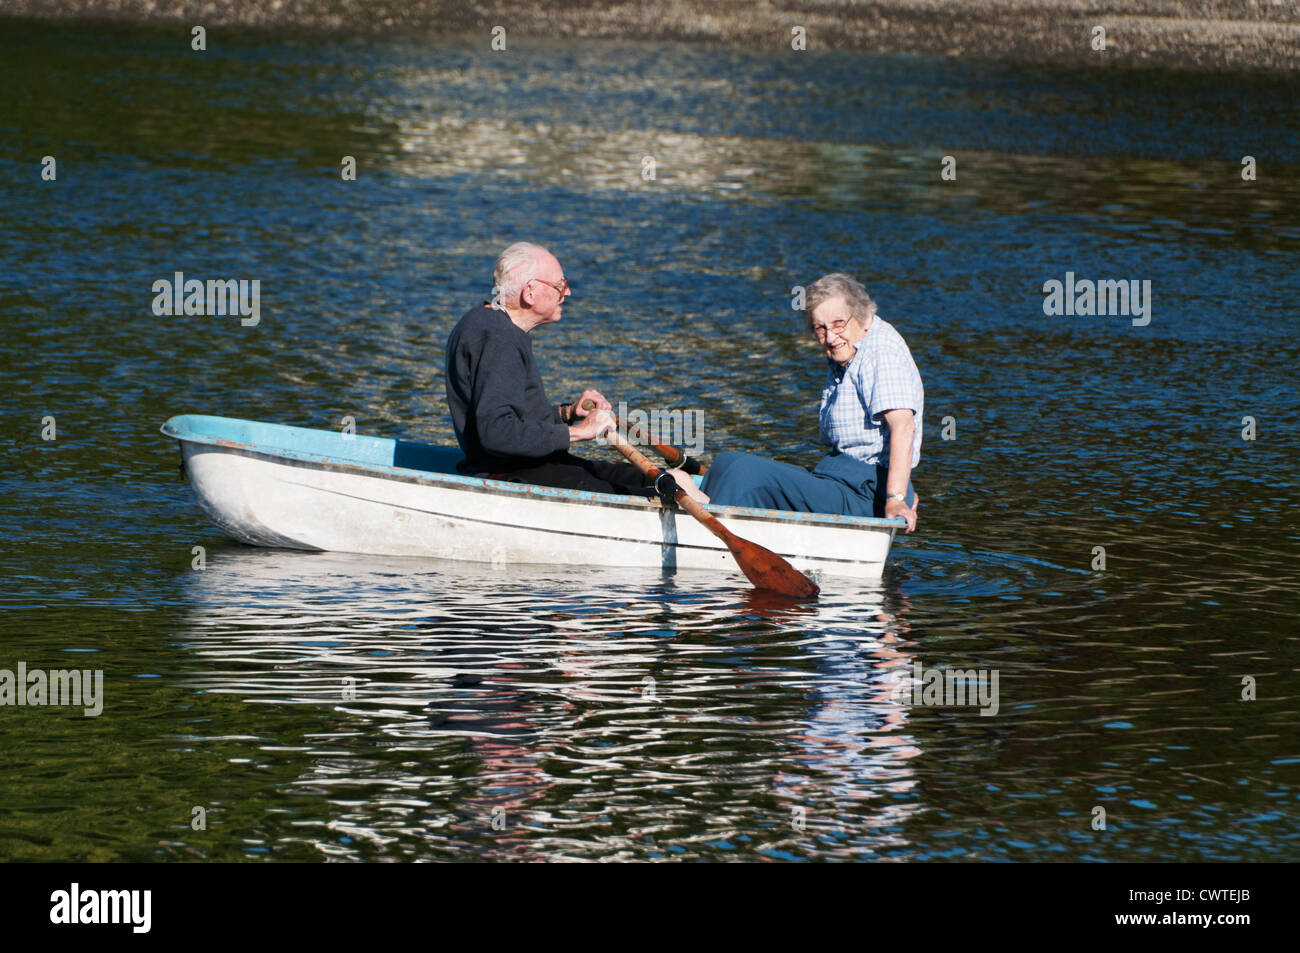 An active, smiling, mature senior adult couple enjoys a summer day on Puget Sound in their rowboat. Stock Photo